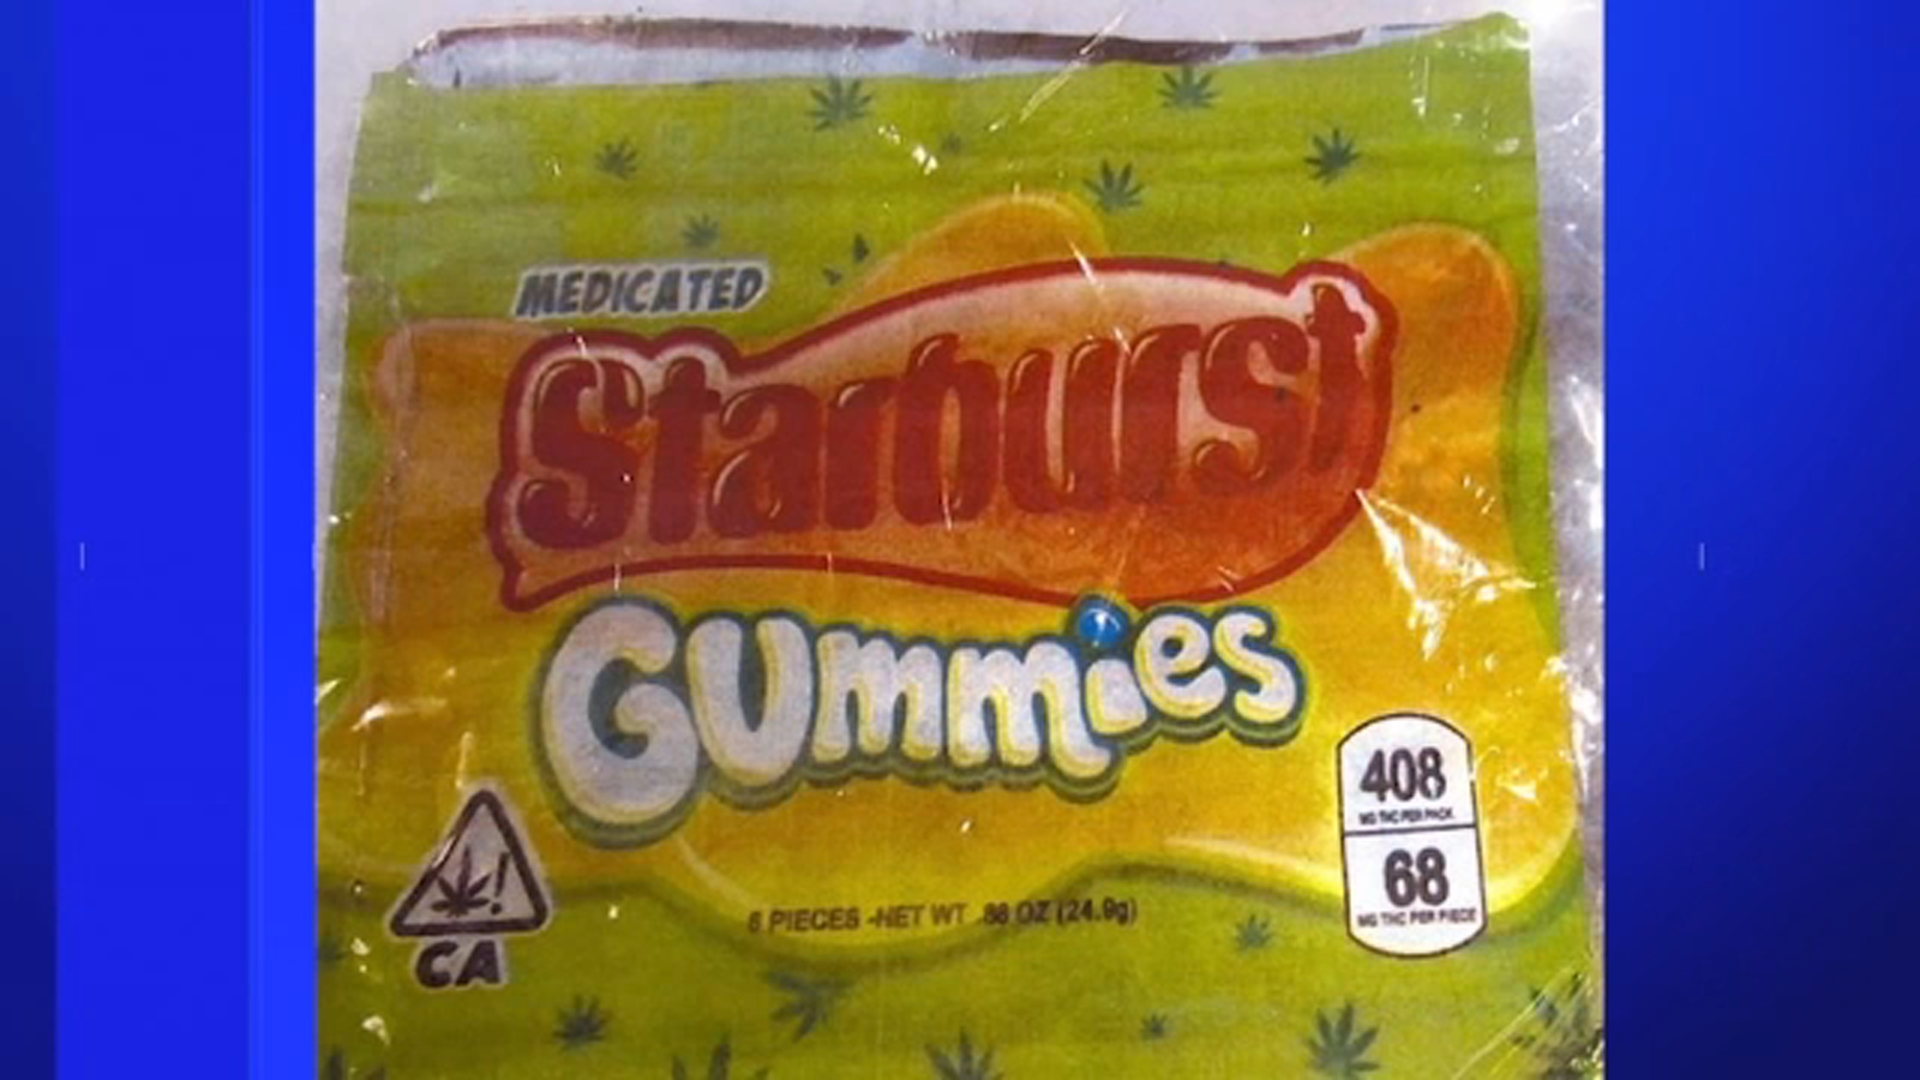 Suffolk County Police say 5-year-old was hospitalized for eating cannabis-infused Halloween candy